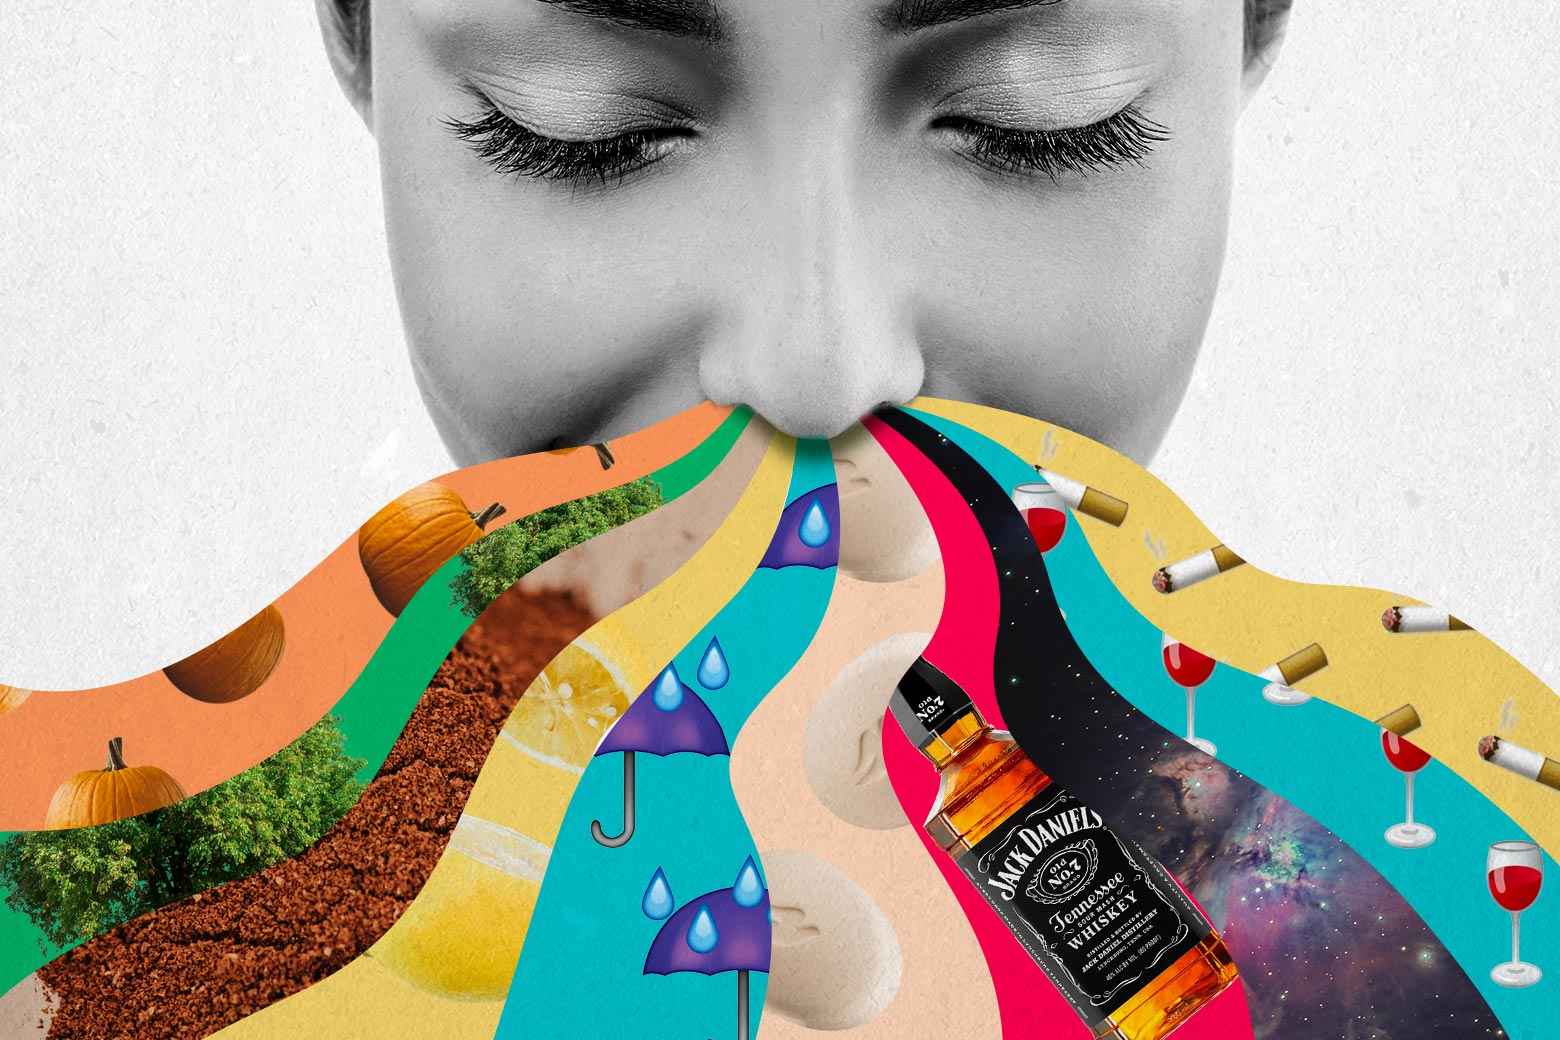 A woman inhaling scents depicted as colorful waves of pumpkins, trees, spices, lemons, umbrellas, soap, Jack Daniels whiskey, the Orion Nebula, glasses of red wine, and cigarettes.